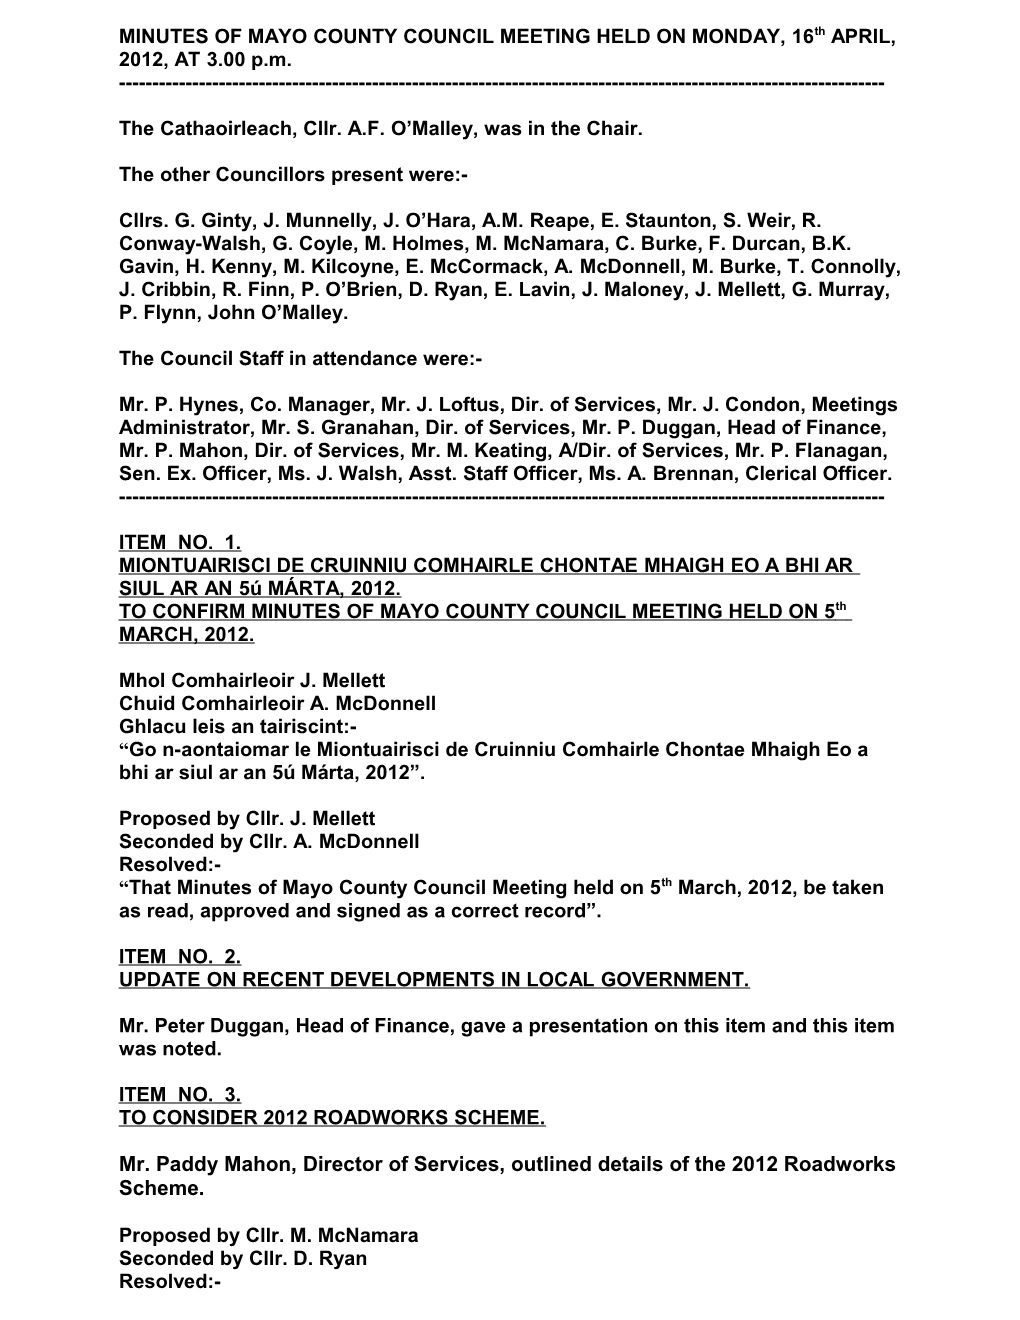 MINUTES of MAYO COUNTY COUNCIL MEETING HELD on MONDAY, 9Th JANUARY, 2012, at 3